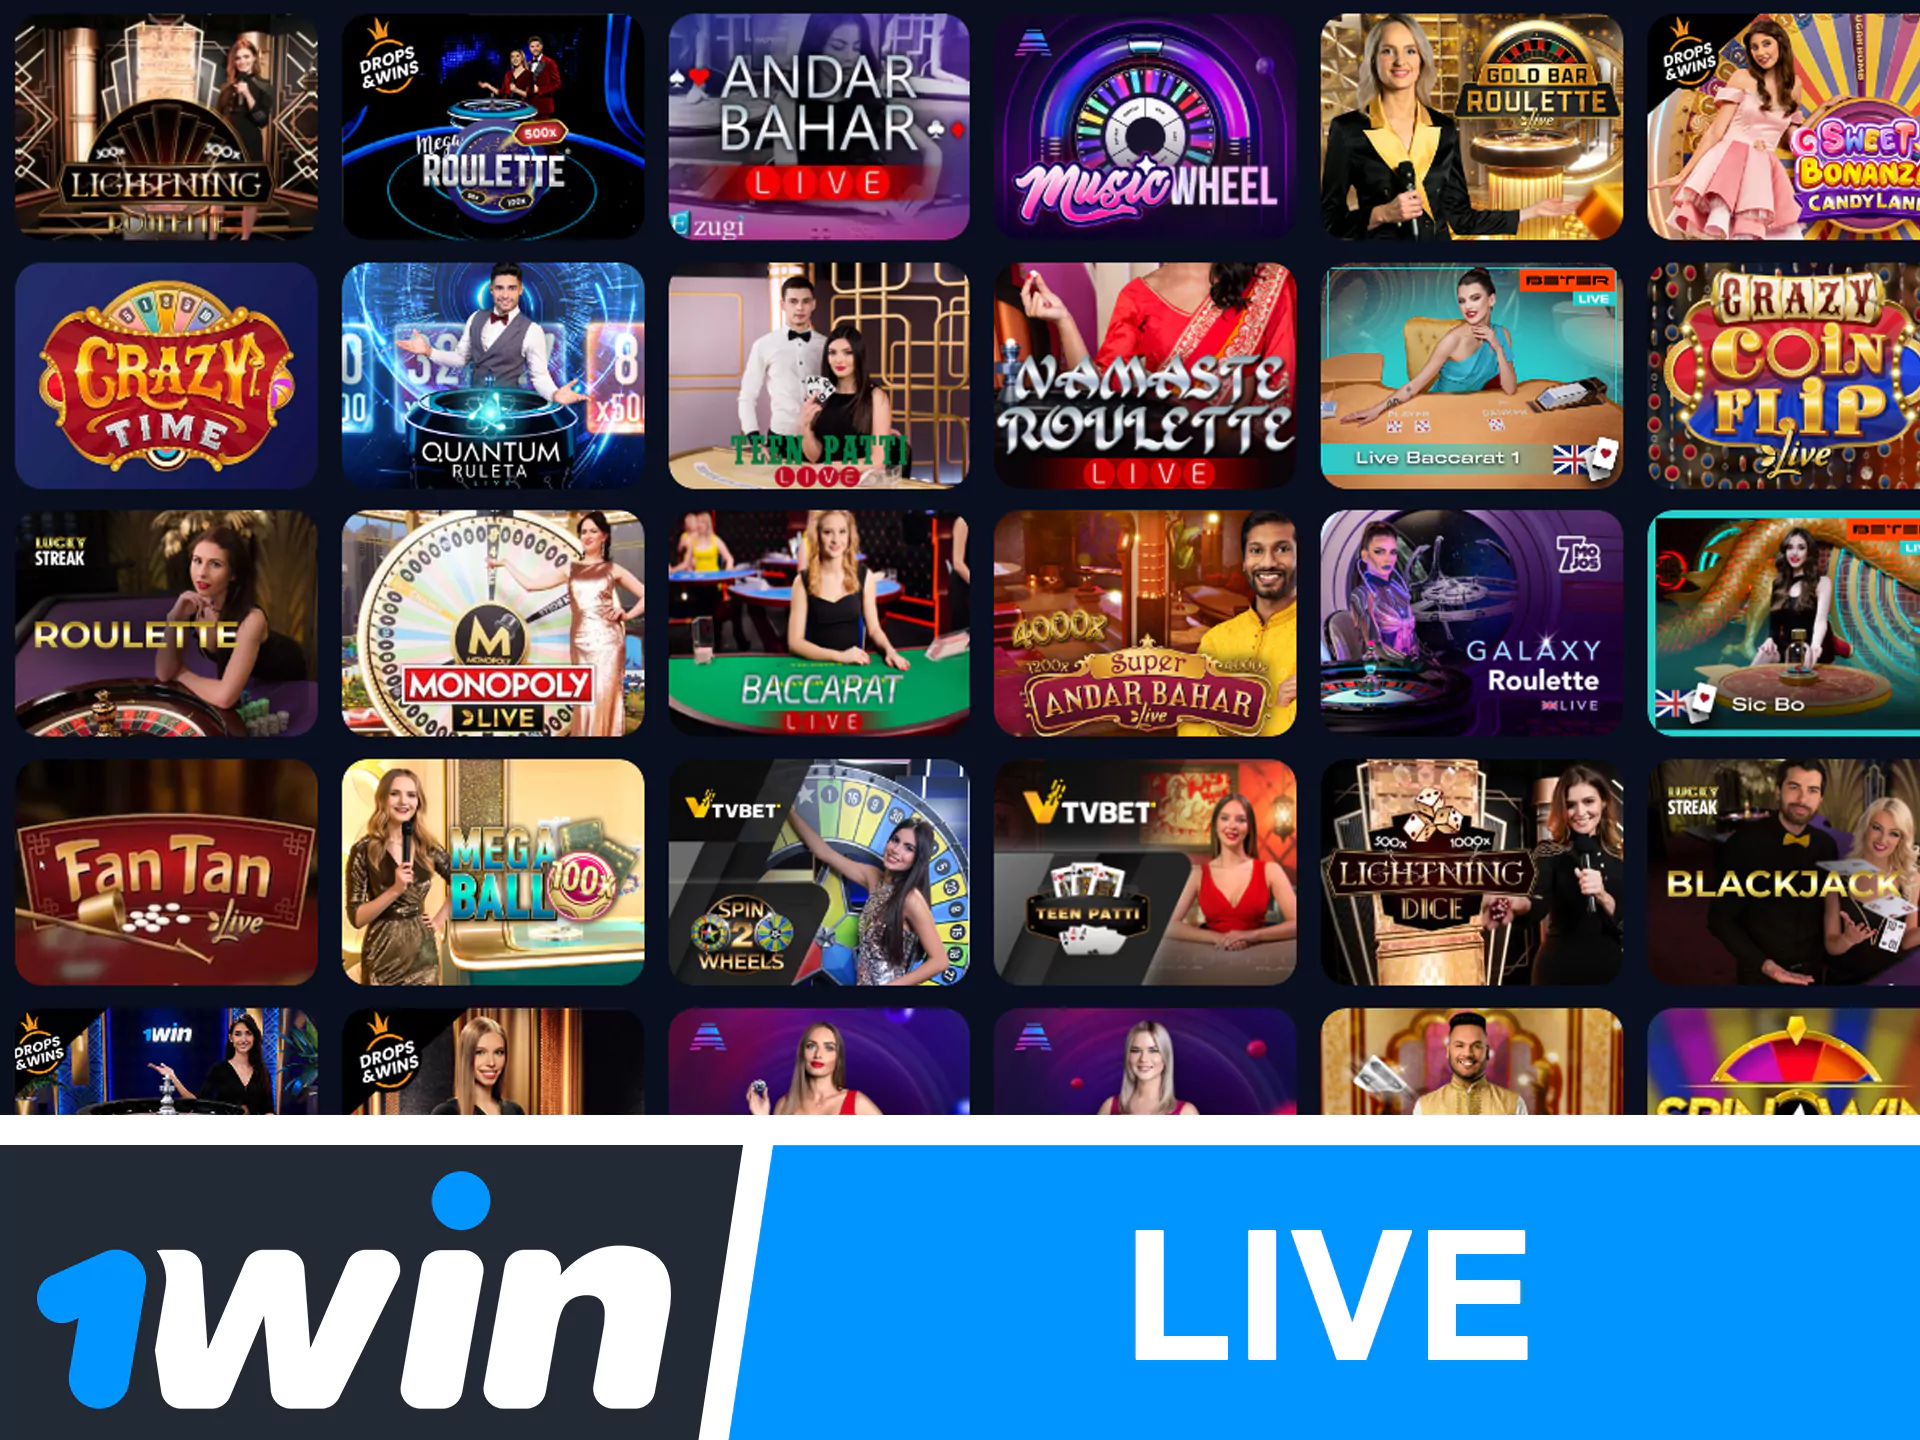 Play live casino games at 1win.